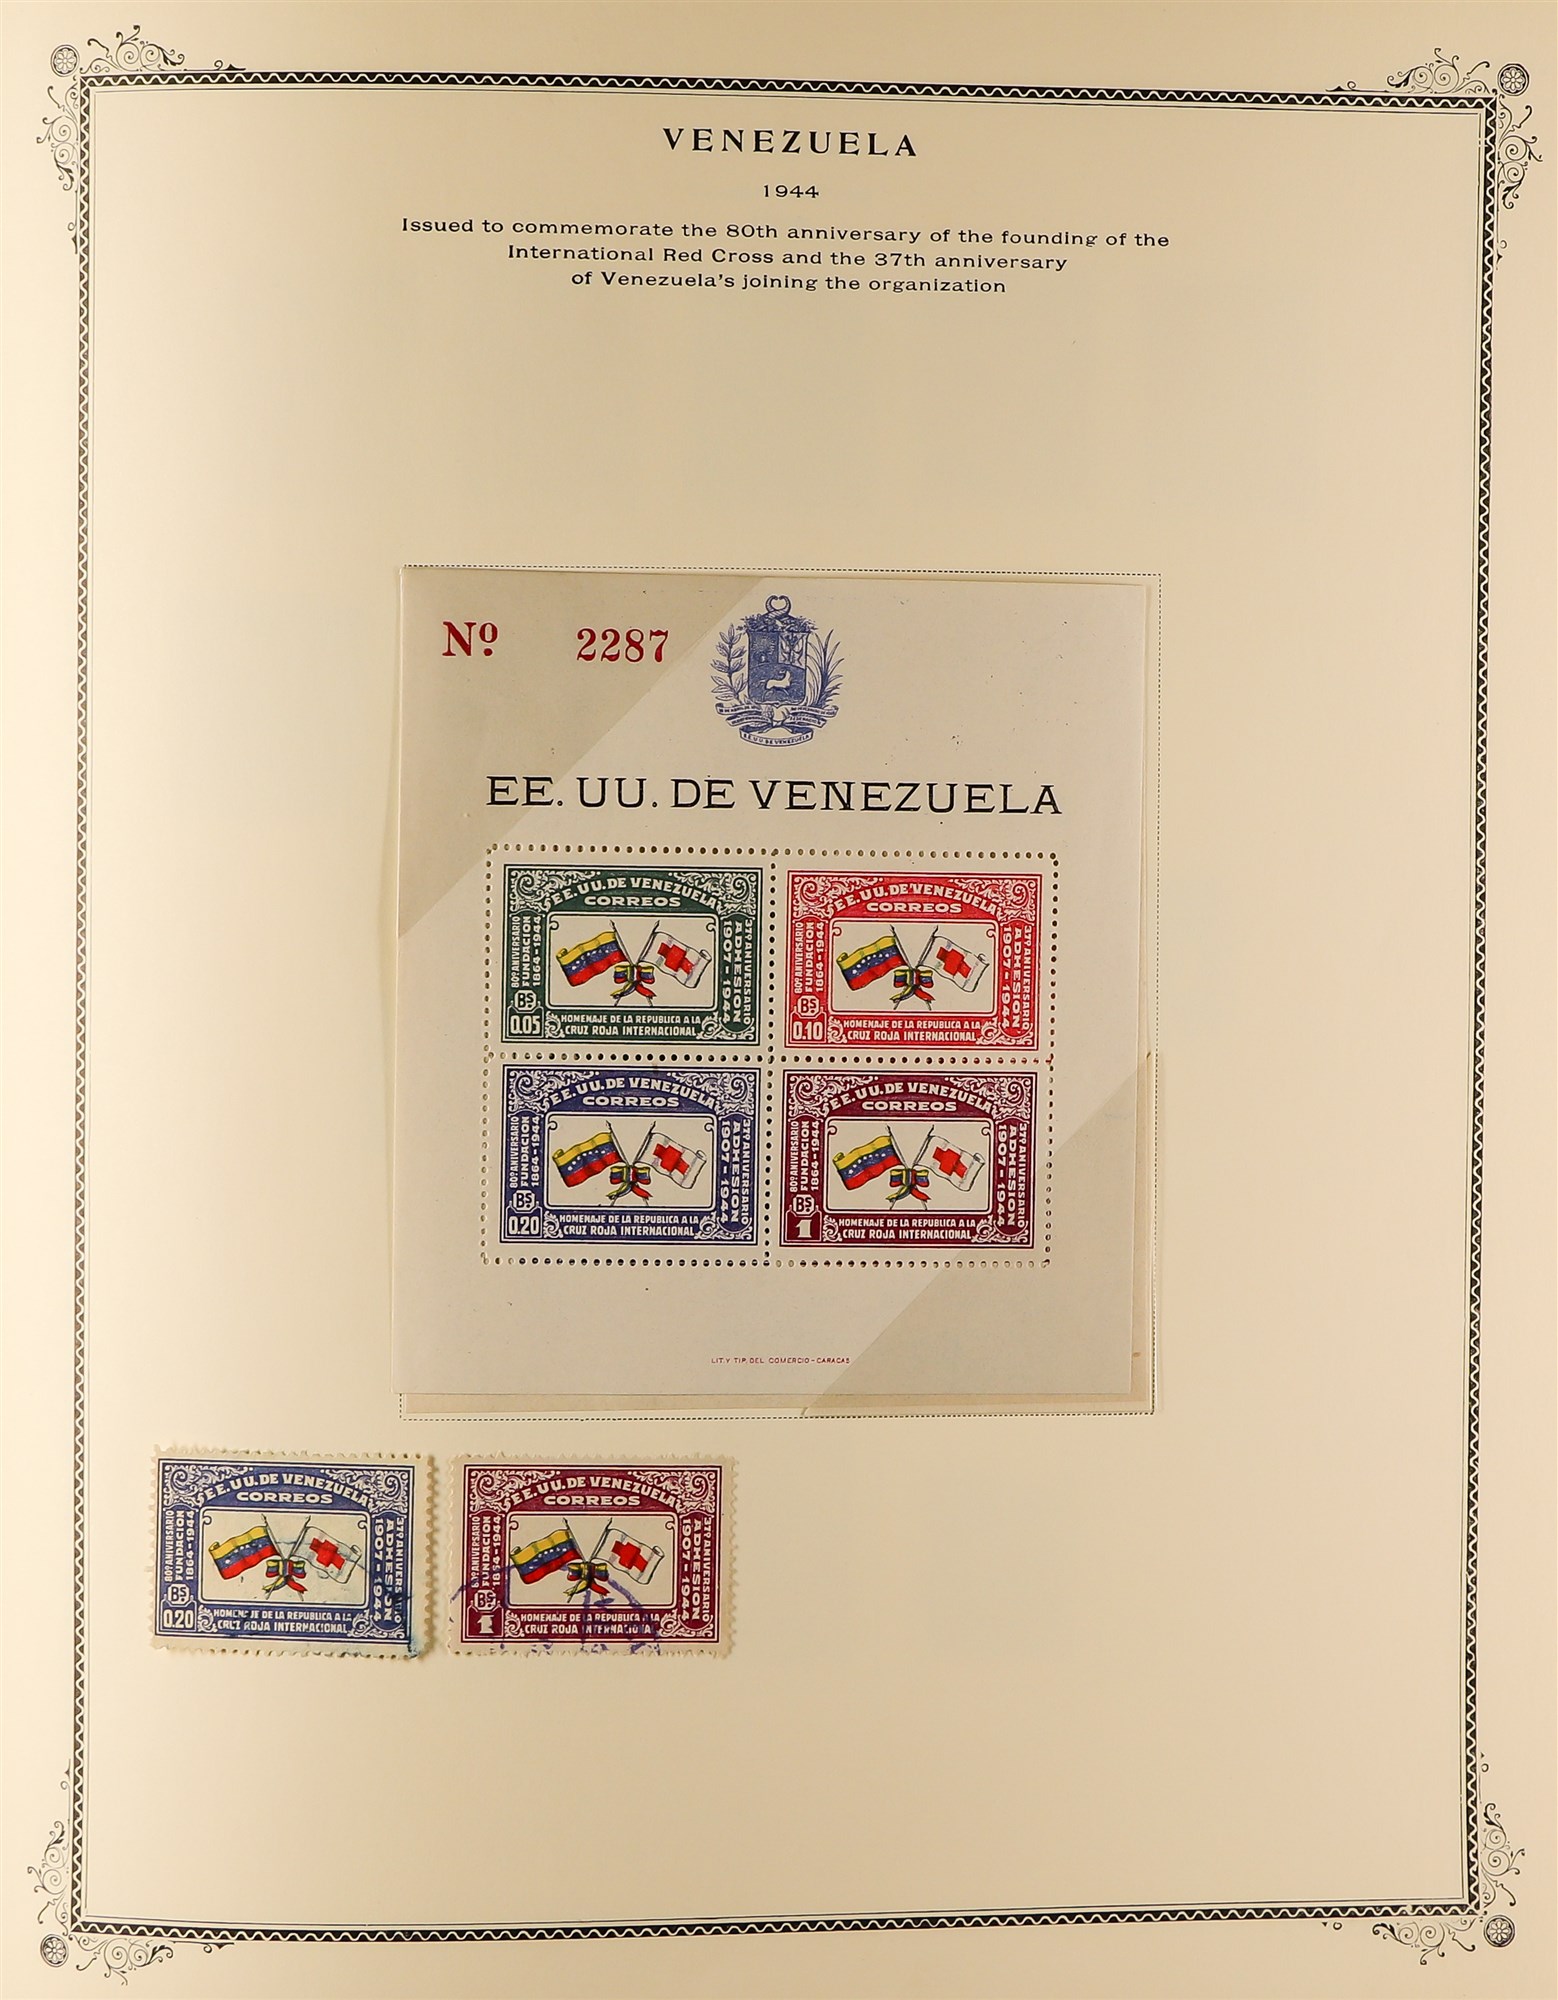 VENEZUELA 1859 - 1976 COLLECTION of 1500+ mint & used stamps in album, note 1859-62 Coat of Arms, - Image 13 of 19